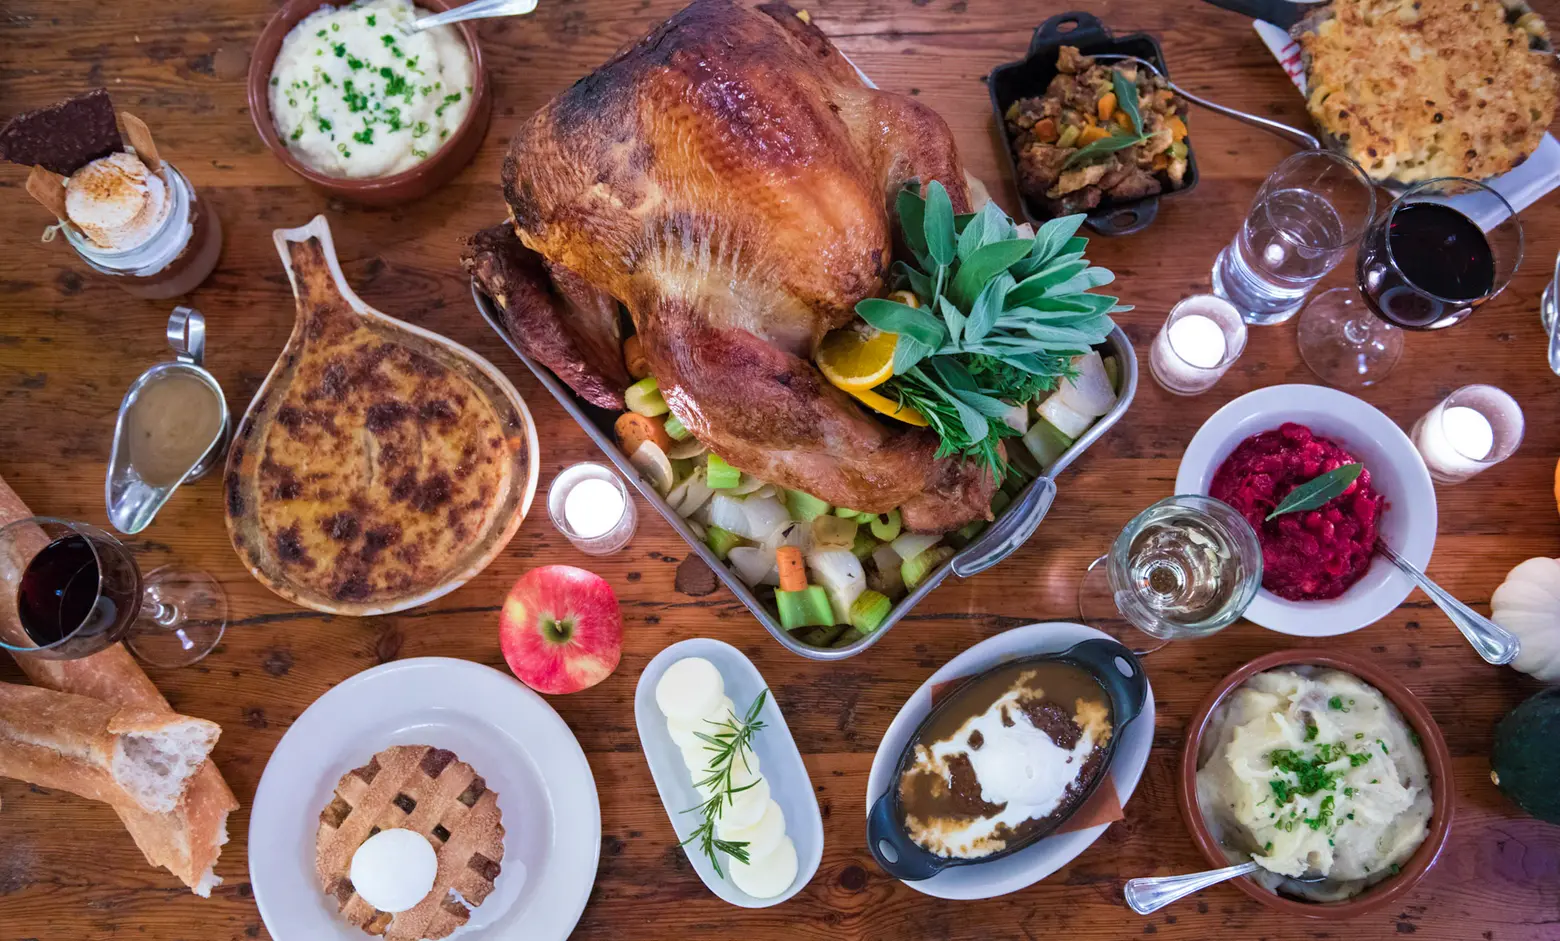 Where to go out for Thanksgiving dinner in NYC | 6sqft